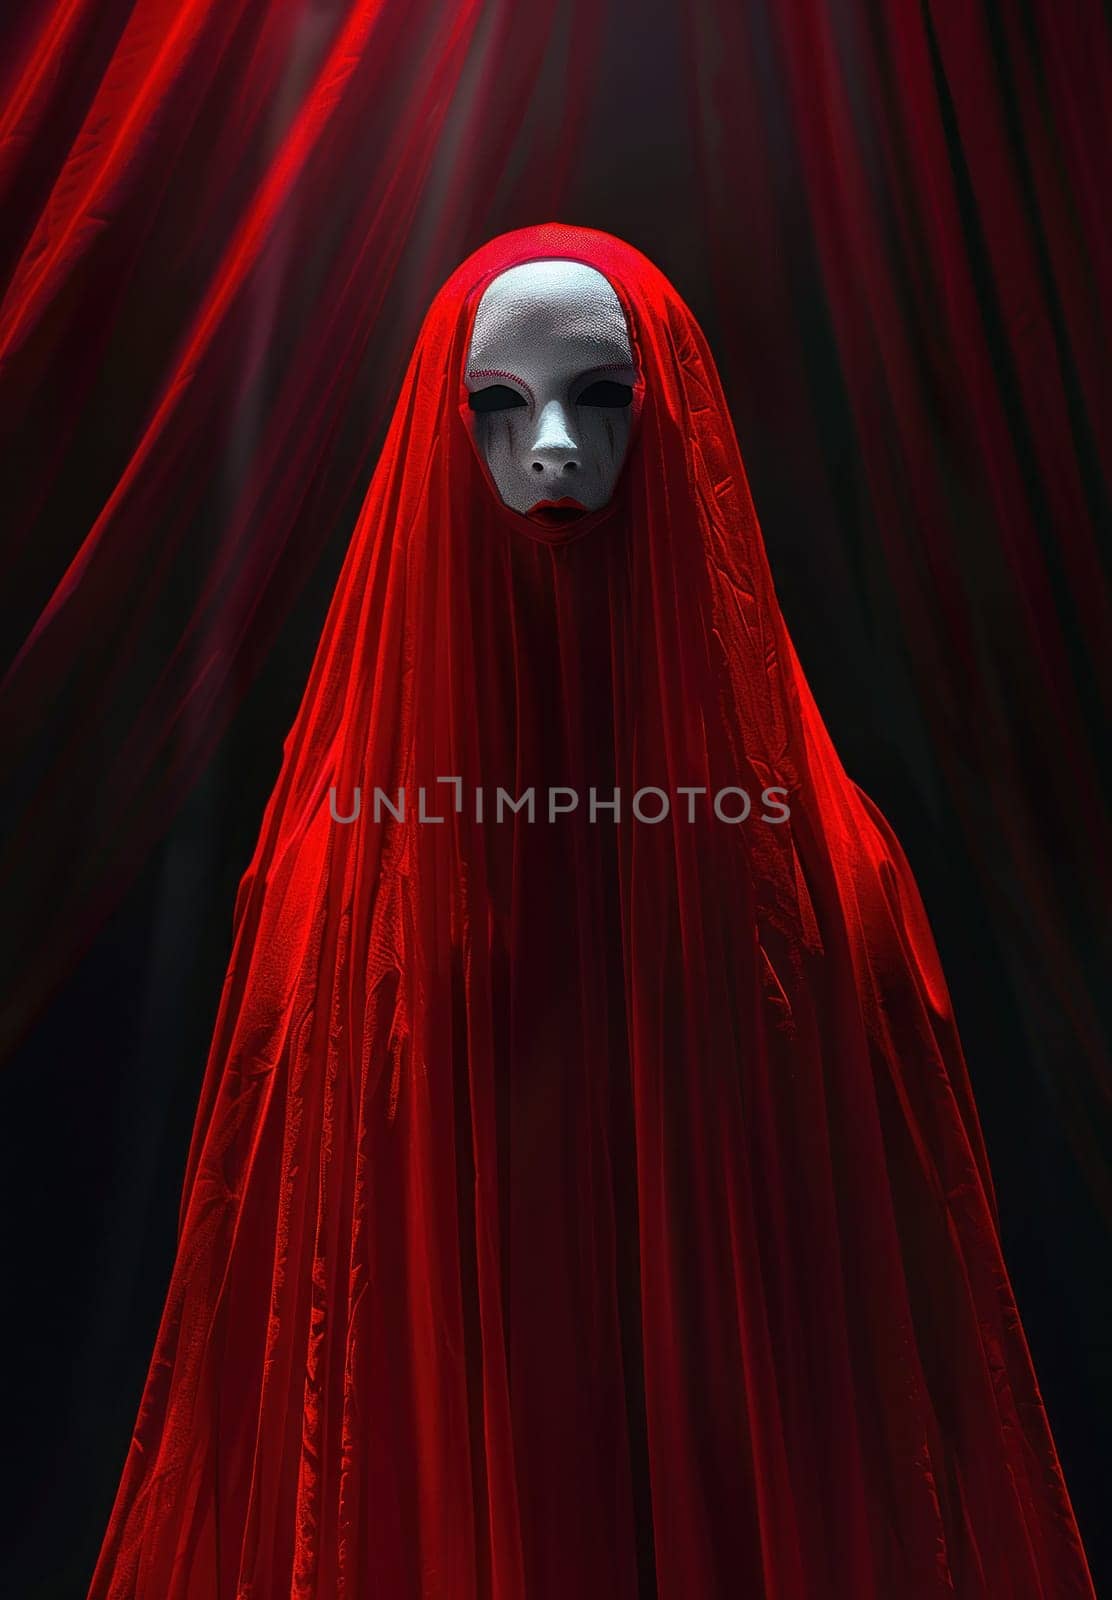 Mysterious woman in red dress with mask standing in front of red curtain, symbolizing beauty and elegance